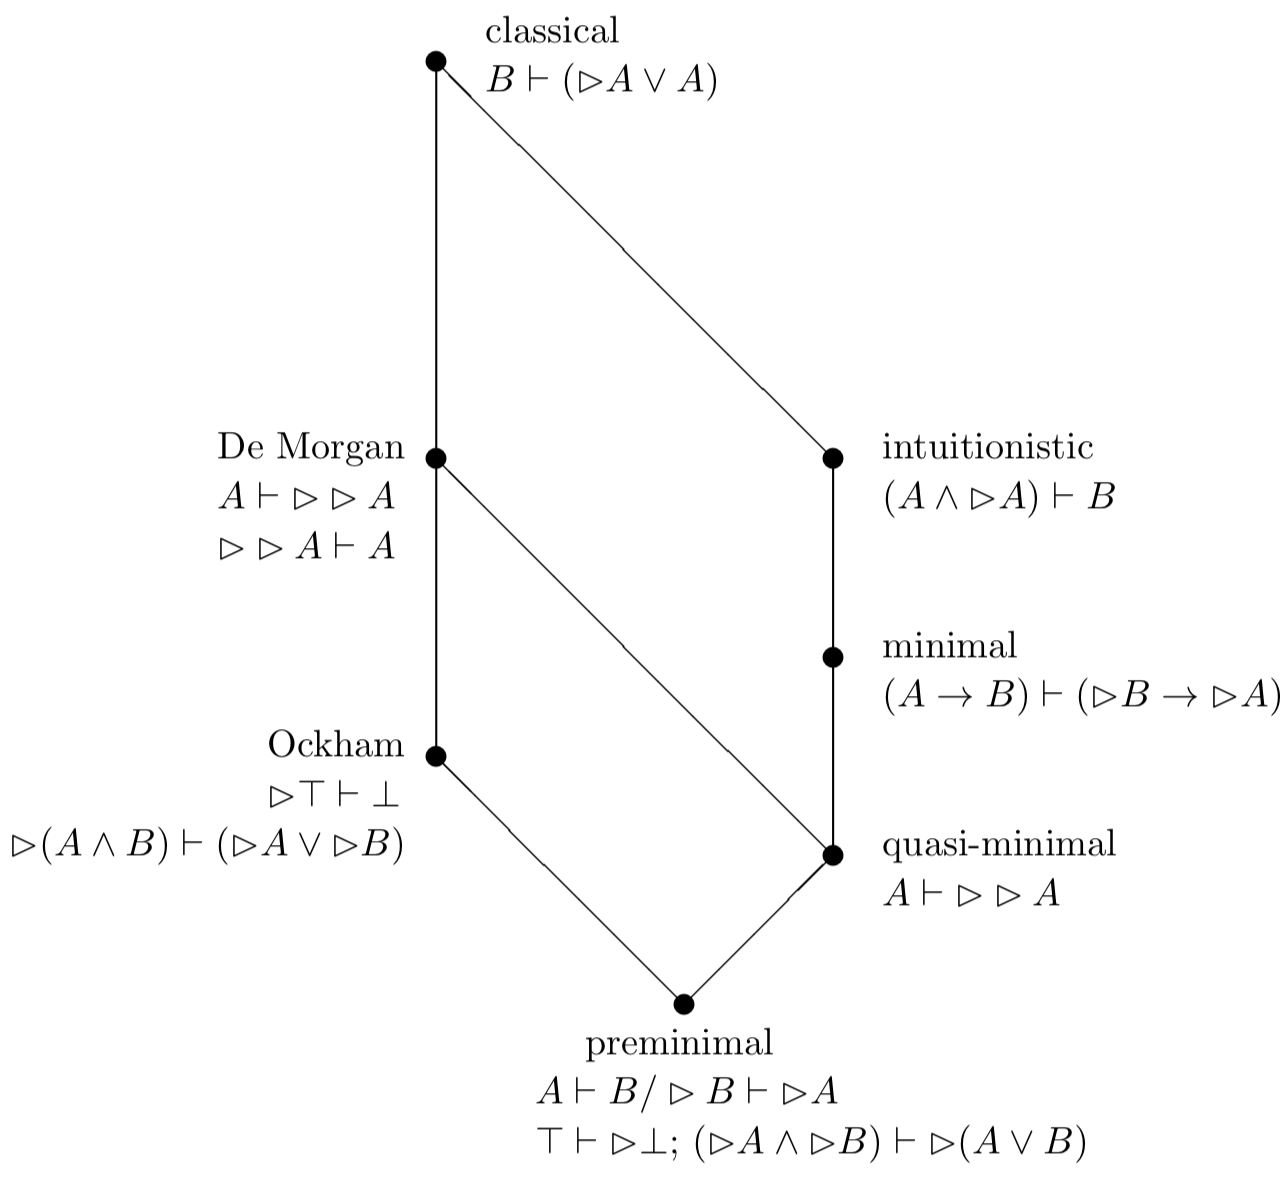 [A kite diagram, upper vertex is 'classical'; lines down to 'De Morgan' on the left and 'intuitionistic' on the right; from 'De Morgan', line straight down to 'Ockham'; then to bottom vertex 'preminimal'; from 'intuitionistic', line straight down to 'minimal', then 'quasi-minimal', and finally to the bottom vertex 'preminimal'.]